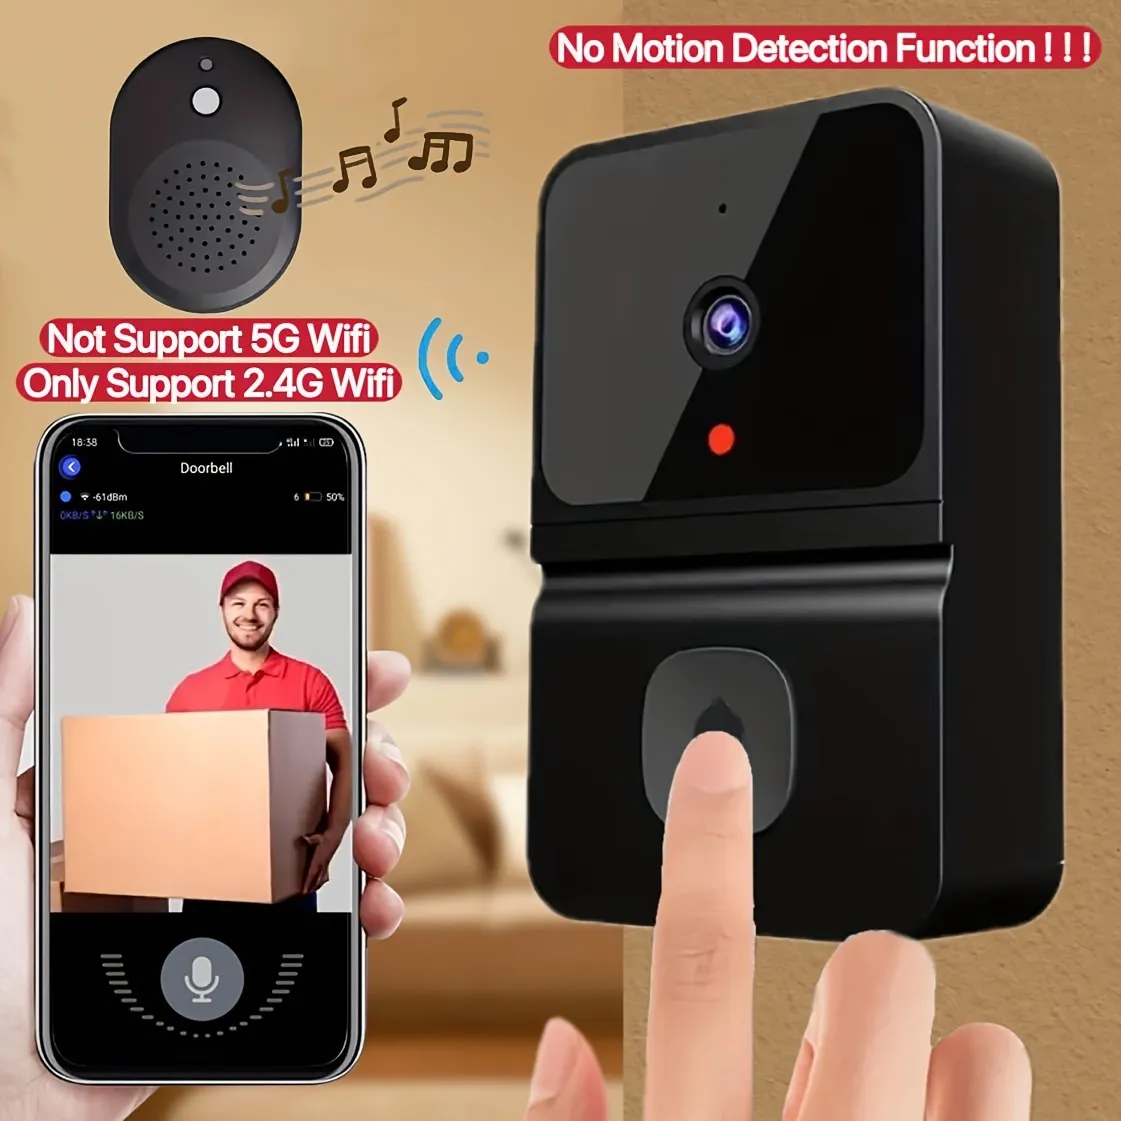 Smart Wireless Doorbell Camera - HD Night Vision, Wi-Fi, Two-Way Audio, Rechargeable Battery, USB, Low Power, Wide Angle View